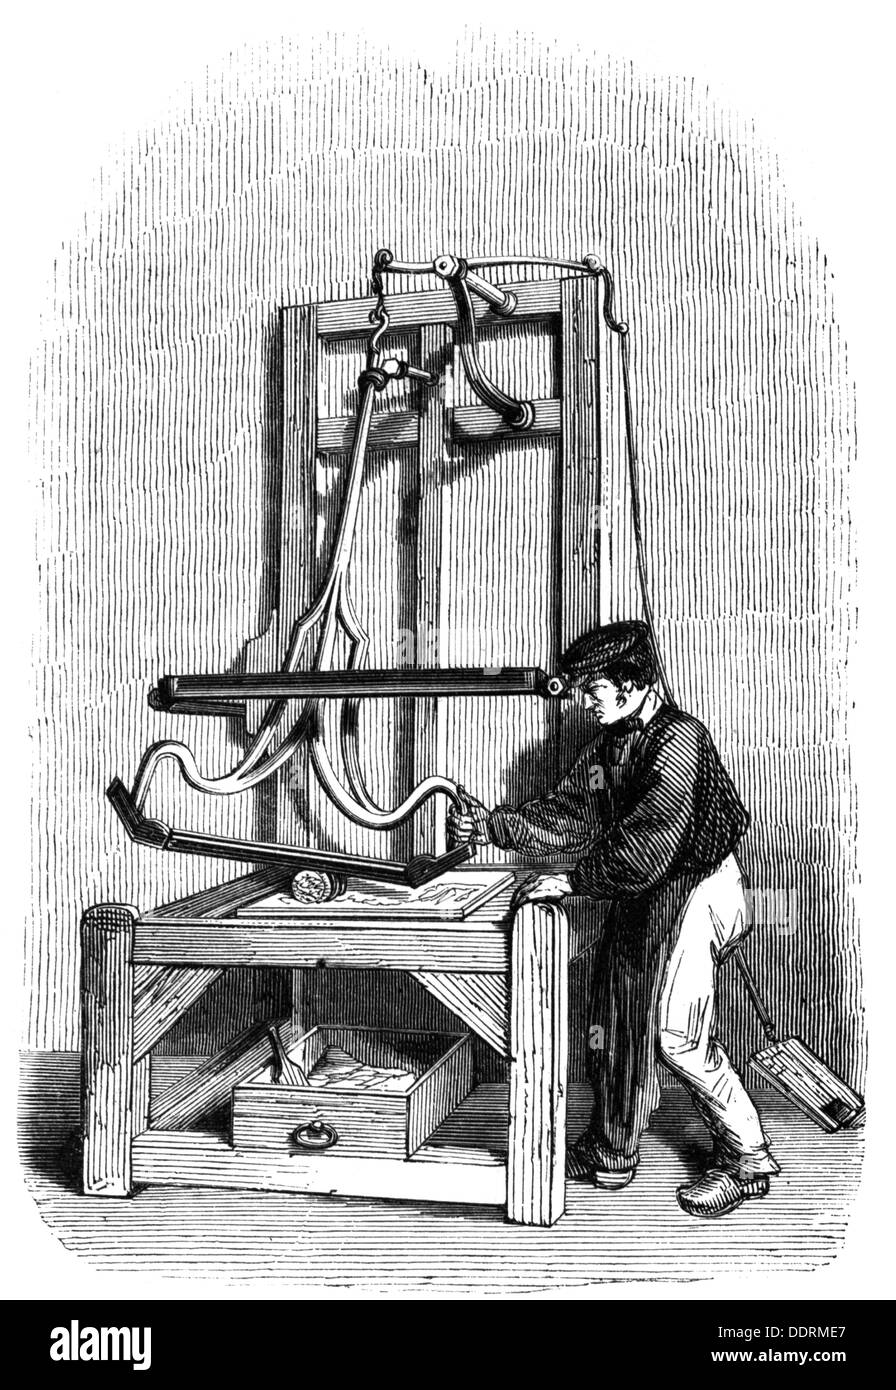 industry, tools, needles, production, straightening the wire, wood engraving, 'Magasin pittoresque', Paris, circa 1865, Additional-Rights-Clearences-Not Available Stock Photo